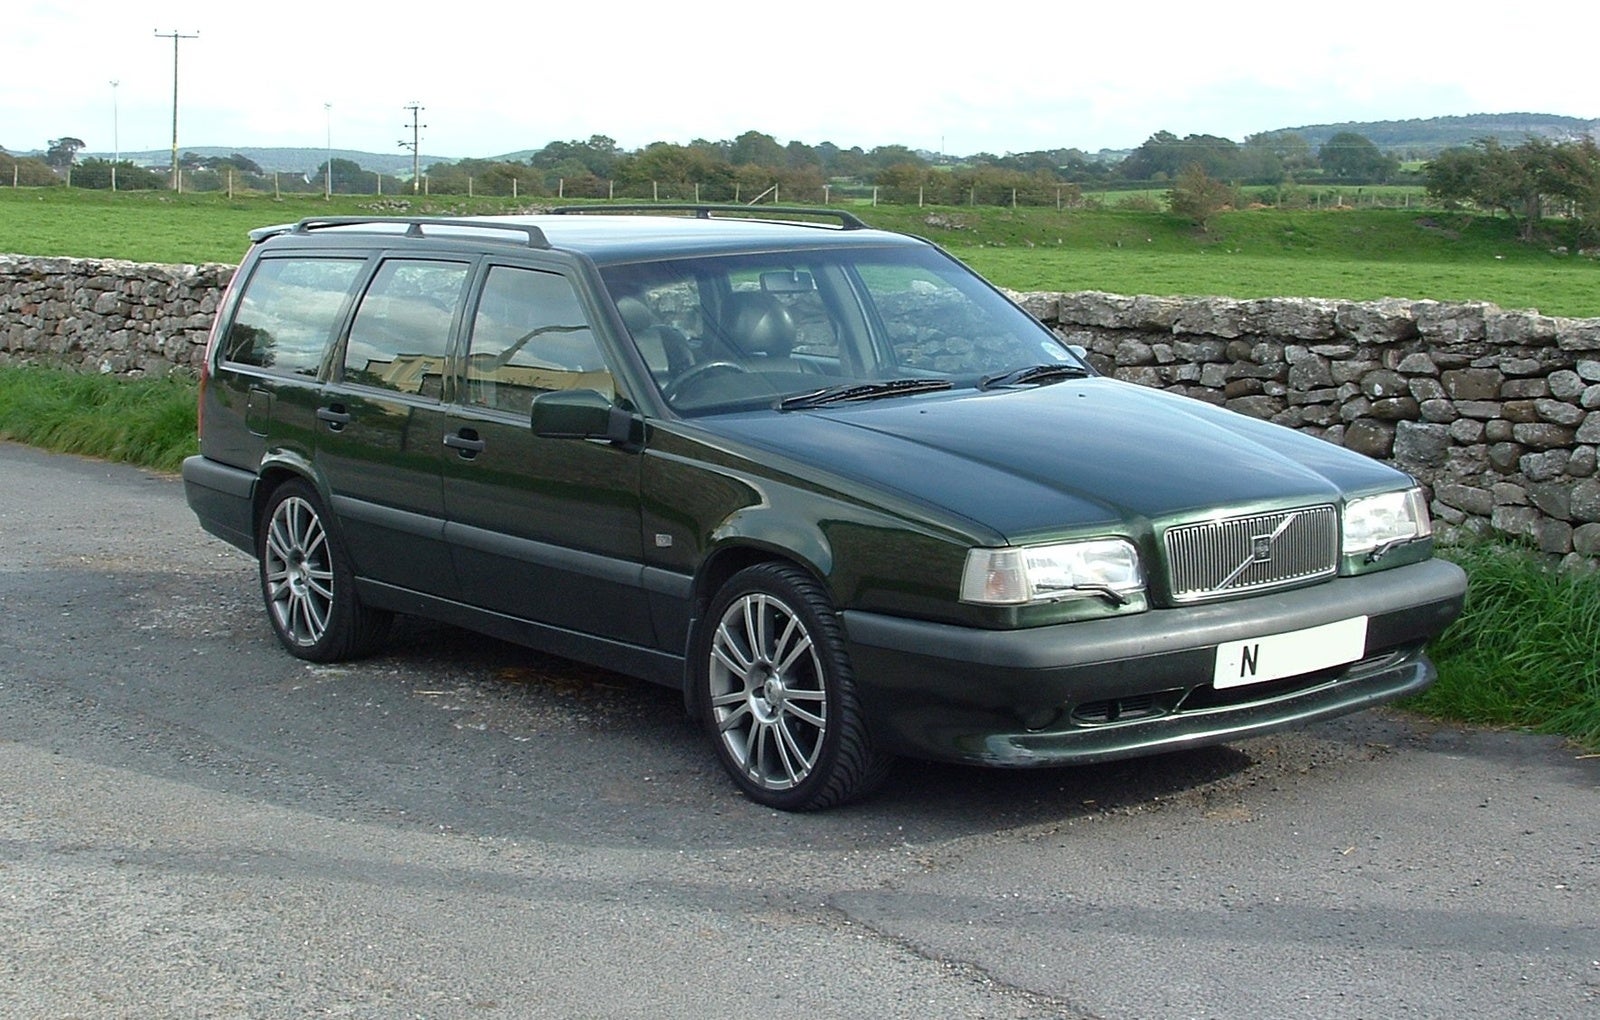  Volvo  on 1995 Volvo 850 4 Dr T5r Turbo Wagon   Pictures   1995 Volvo 850 4 Dr